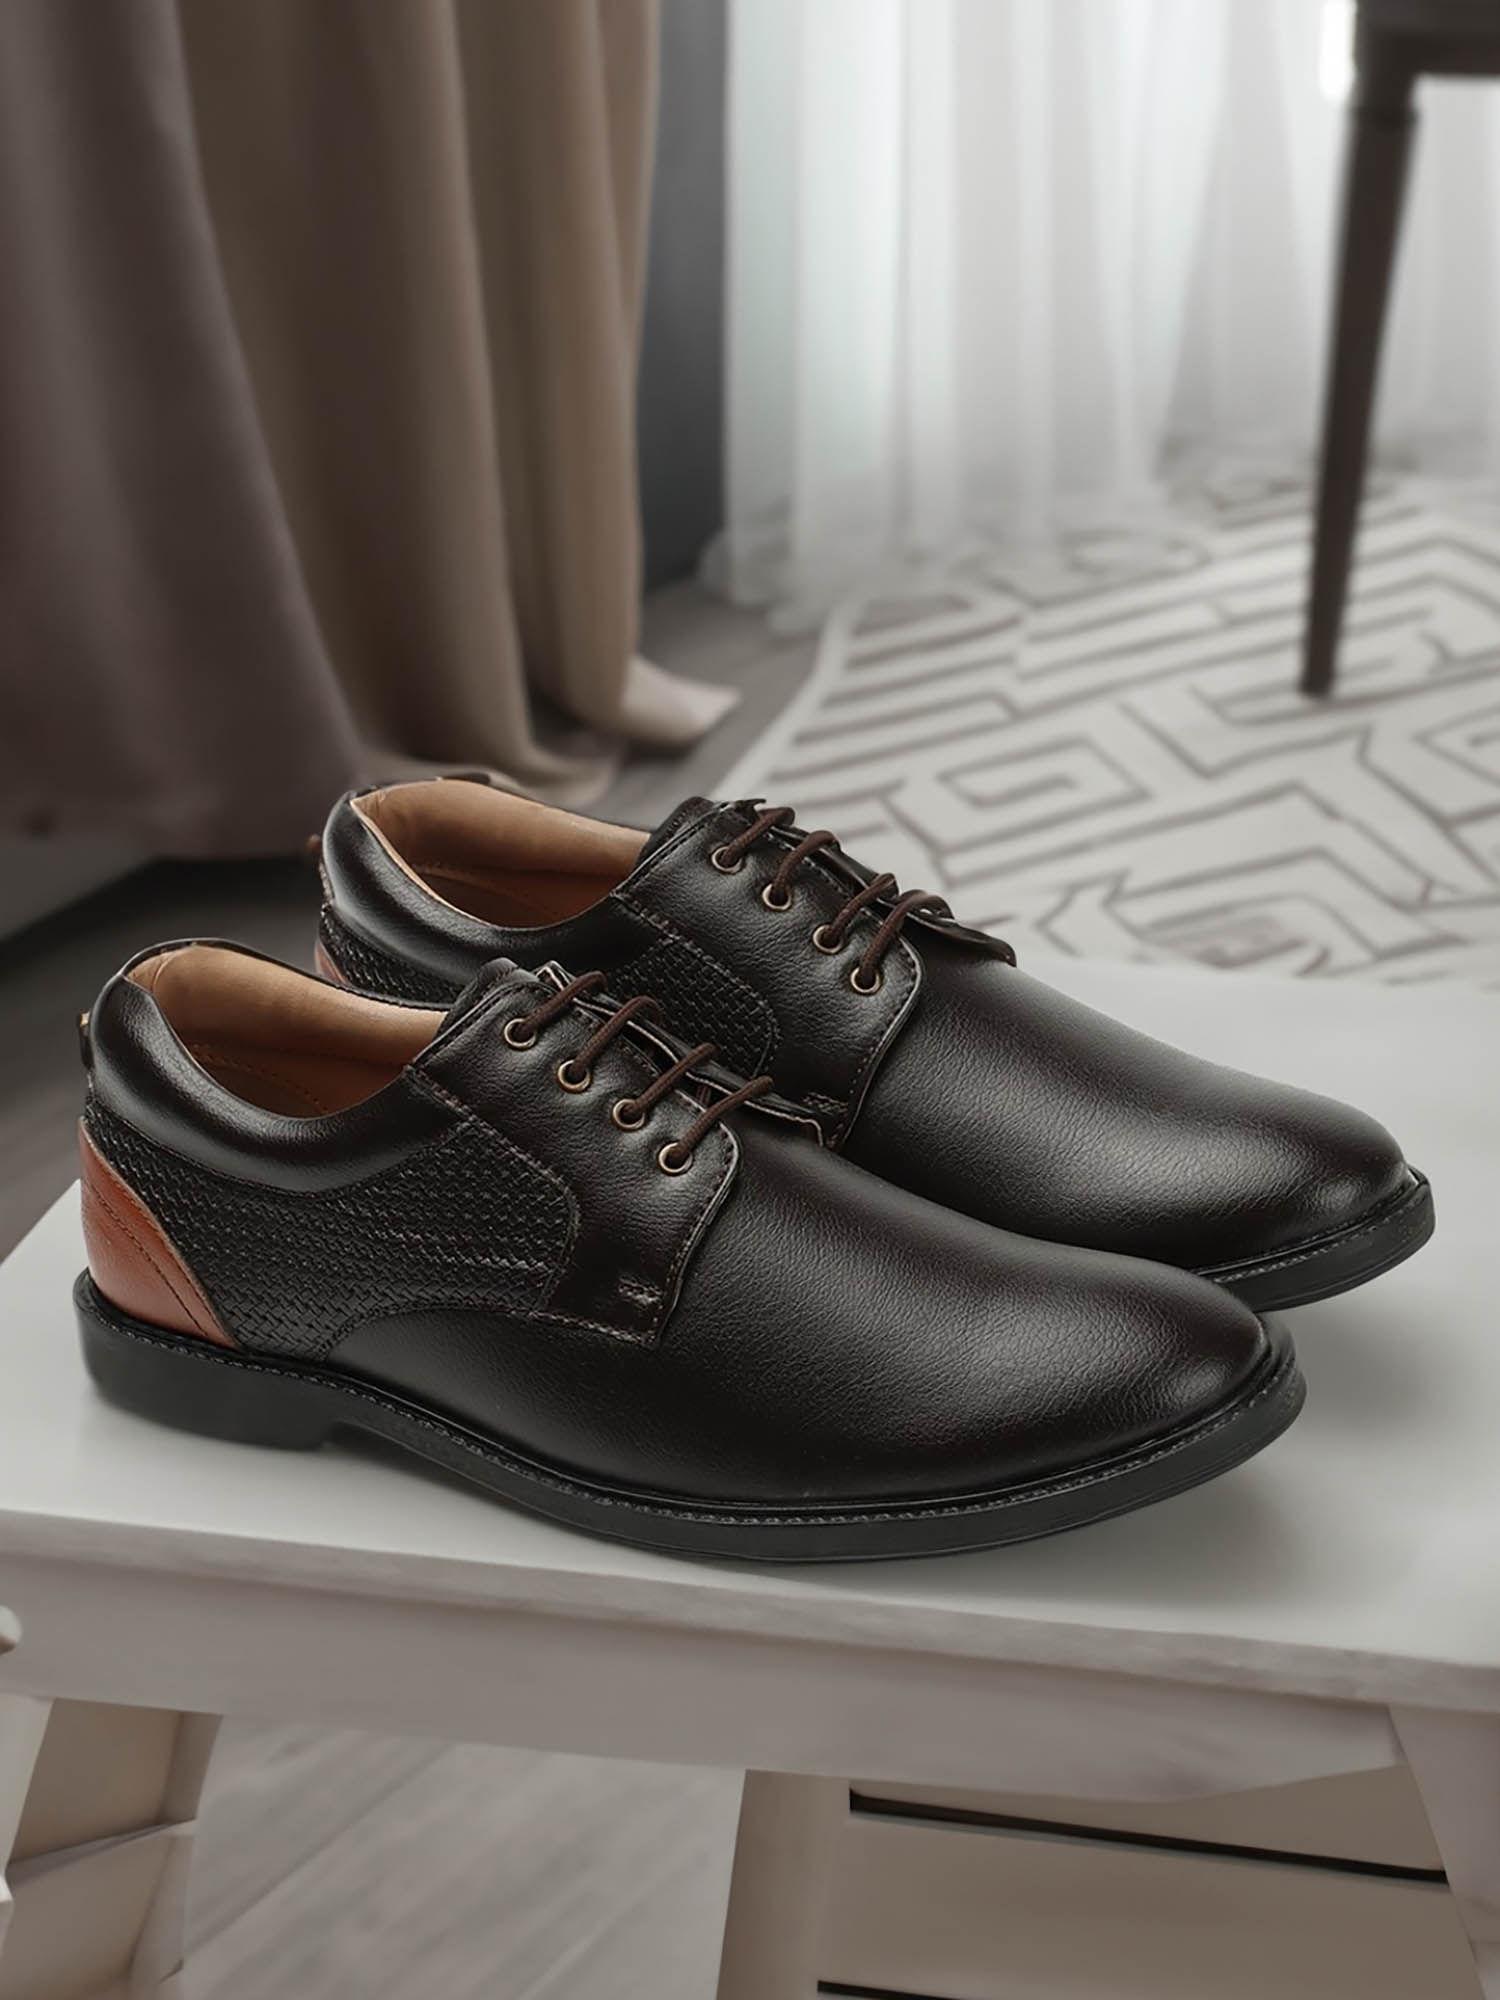 mens-stylish-brown-color-formal-lace-ups-derbies